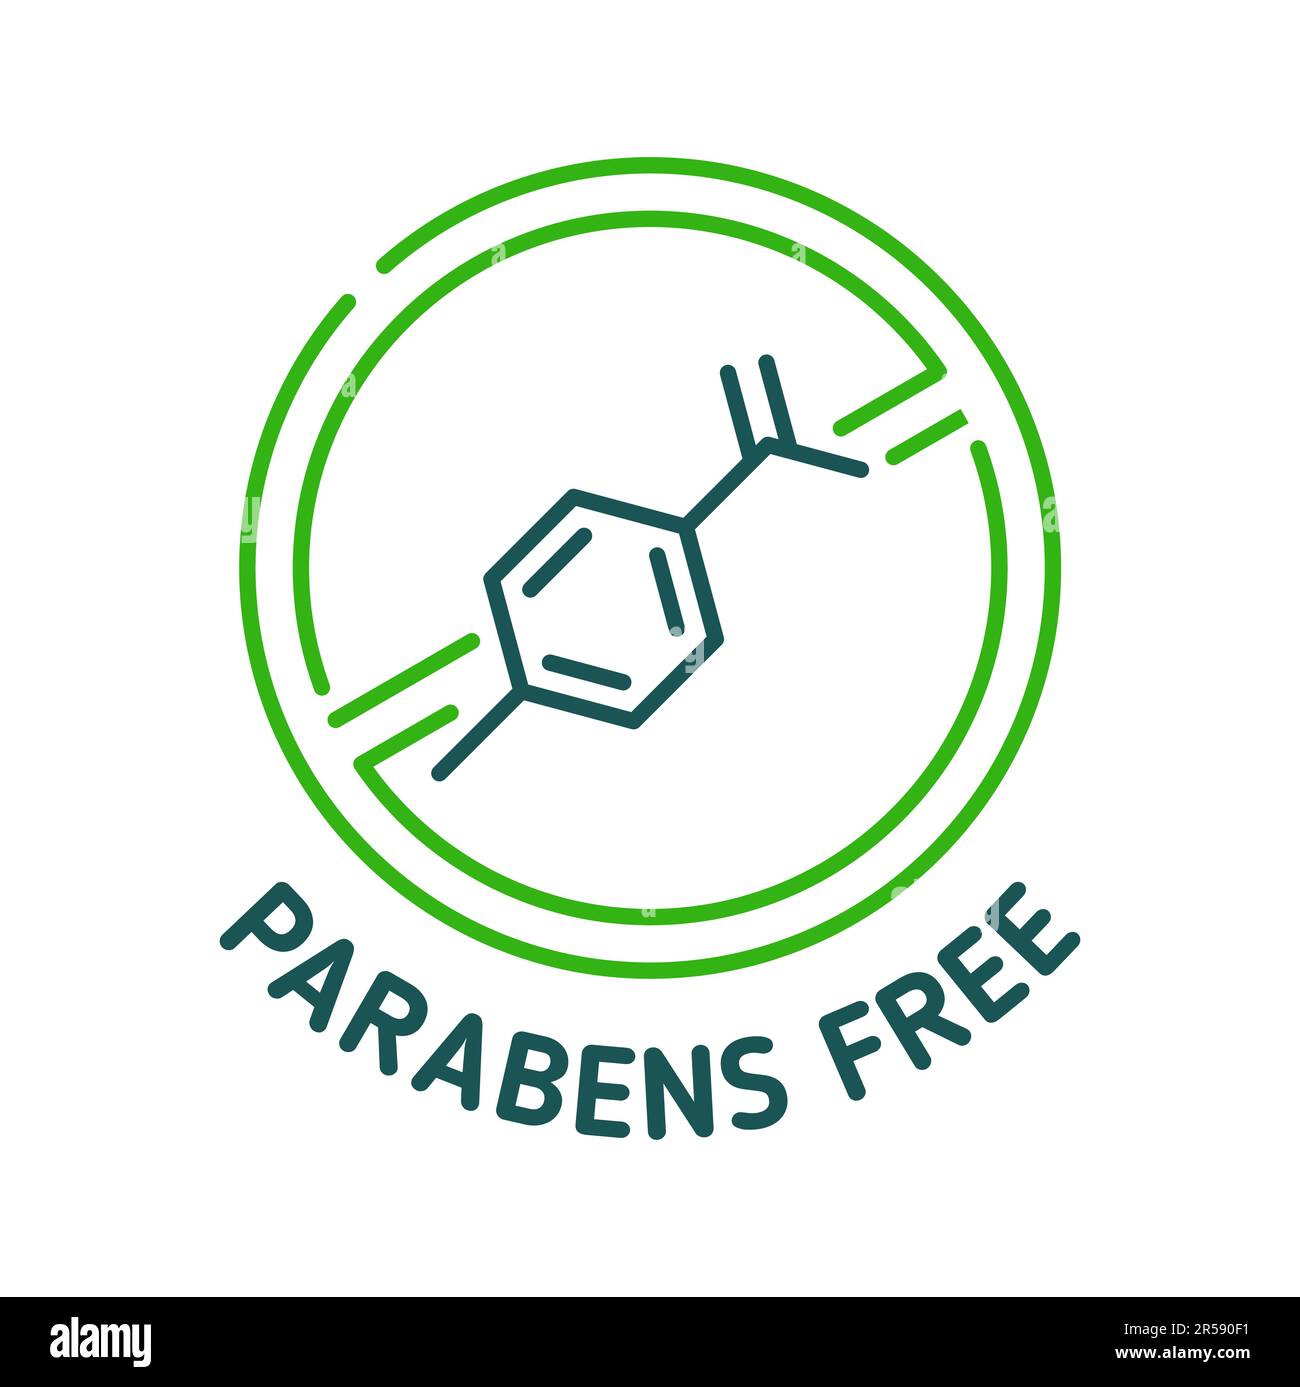 Parabens free icon or sign for natural organic and no chemical preservative product, vector symbol. Parabens free icon for cosmetics, skincare and hea Stock Vector